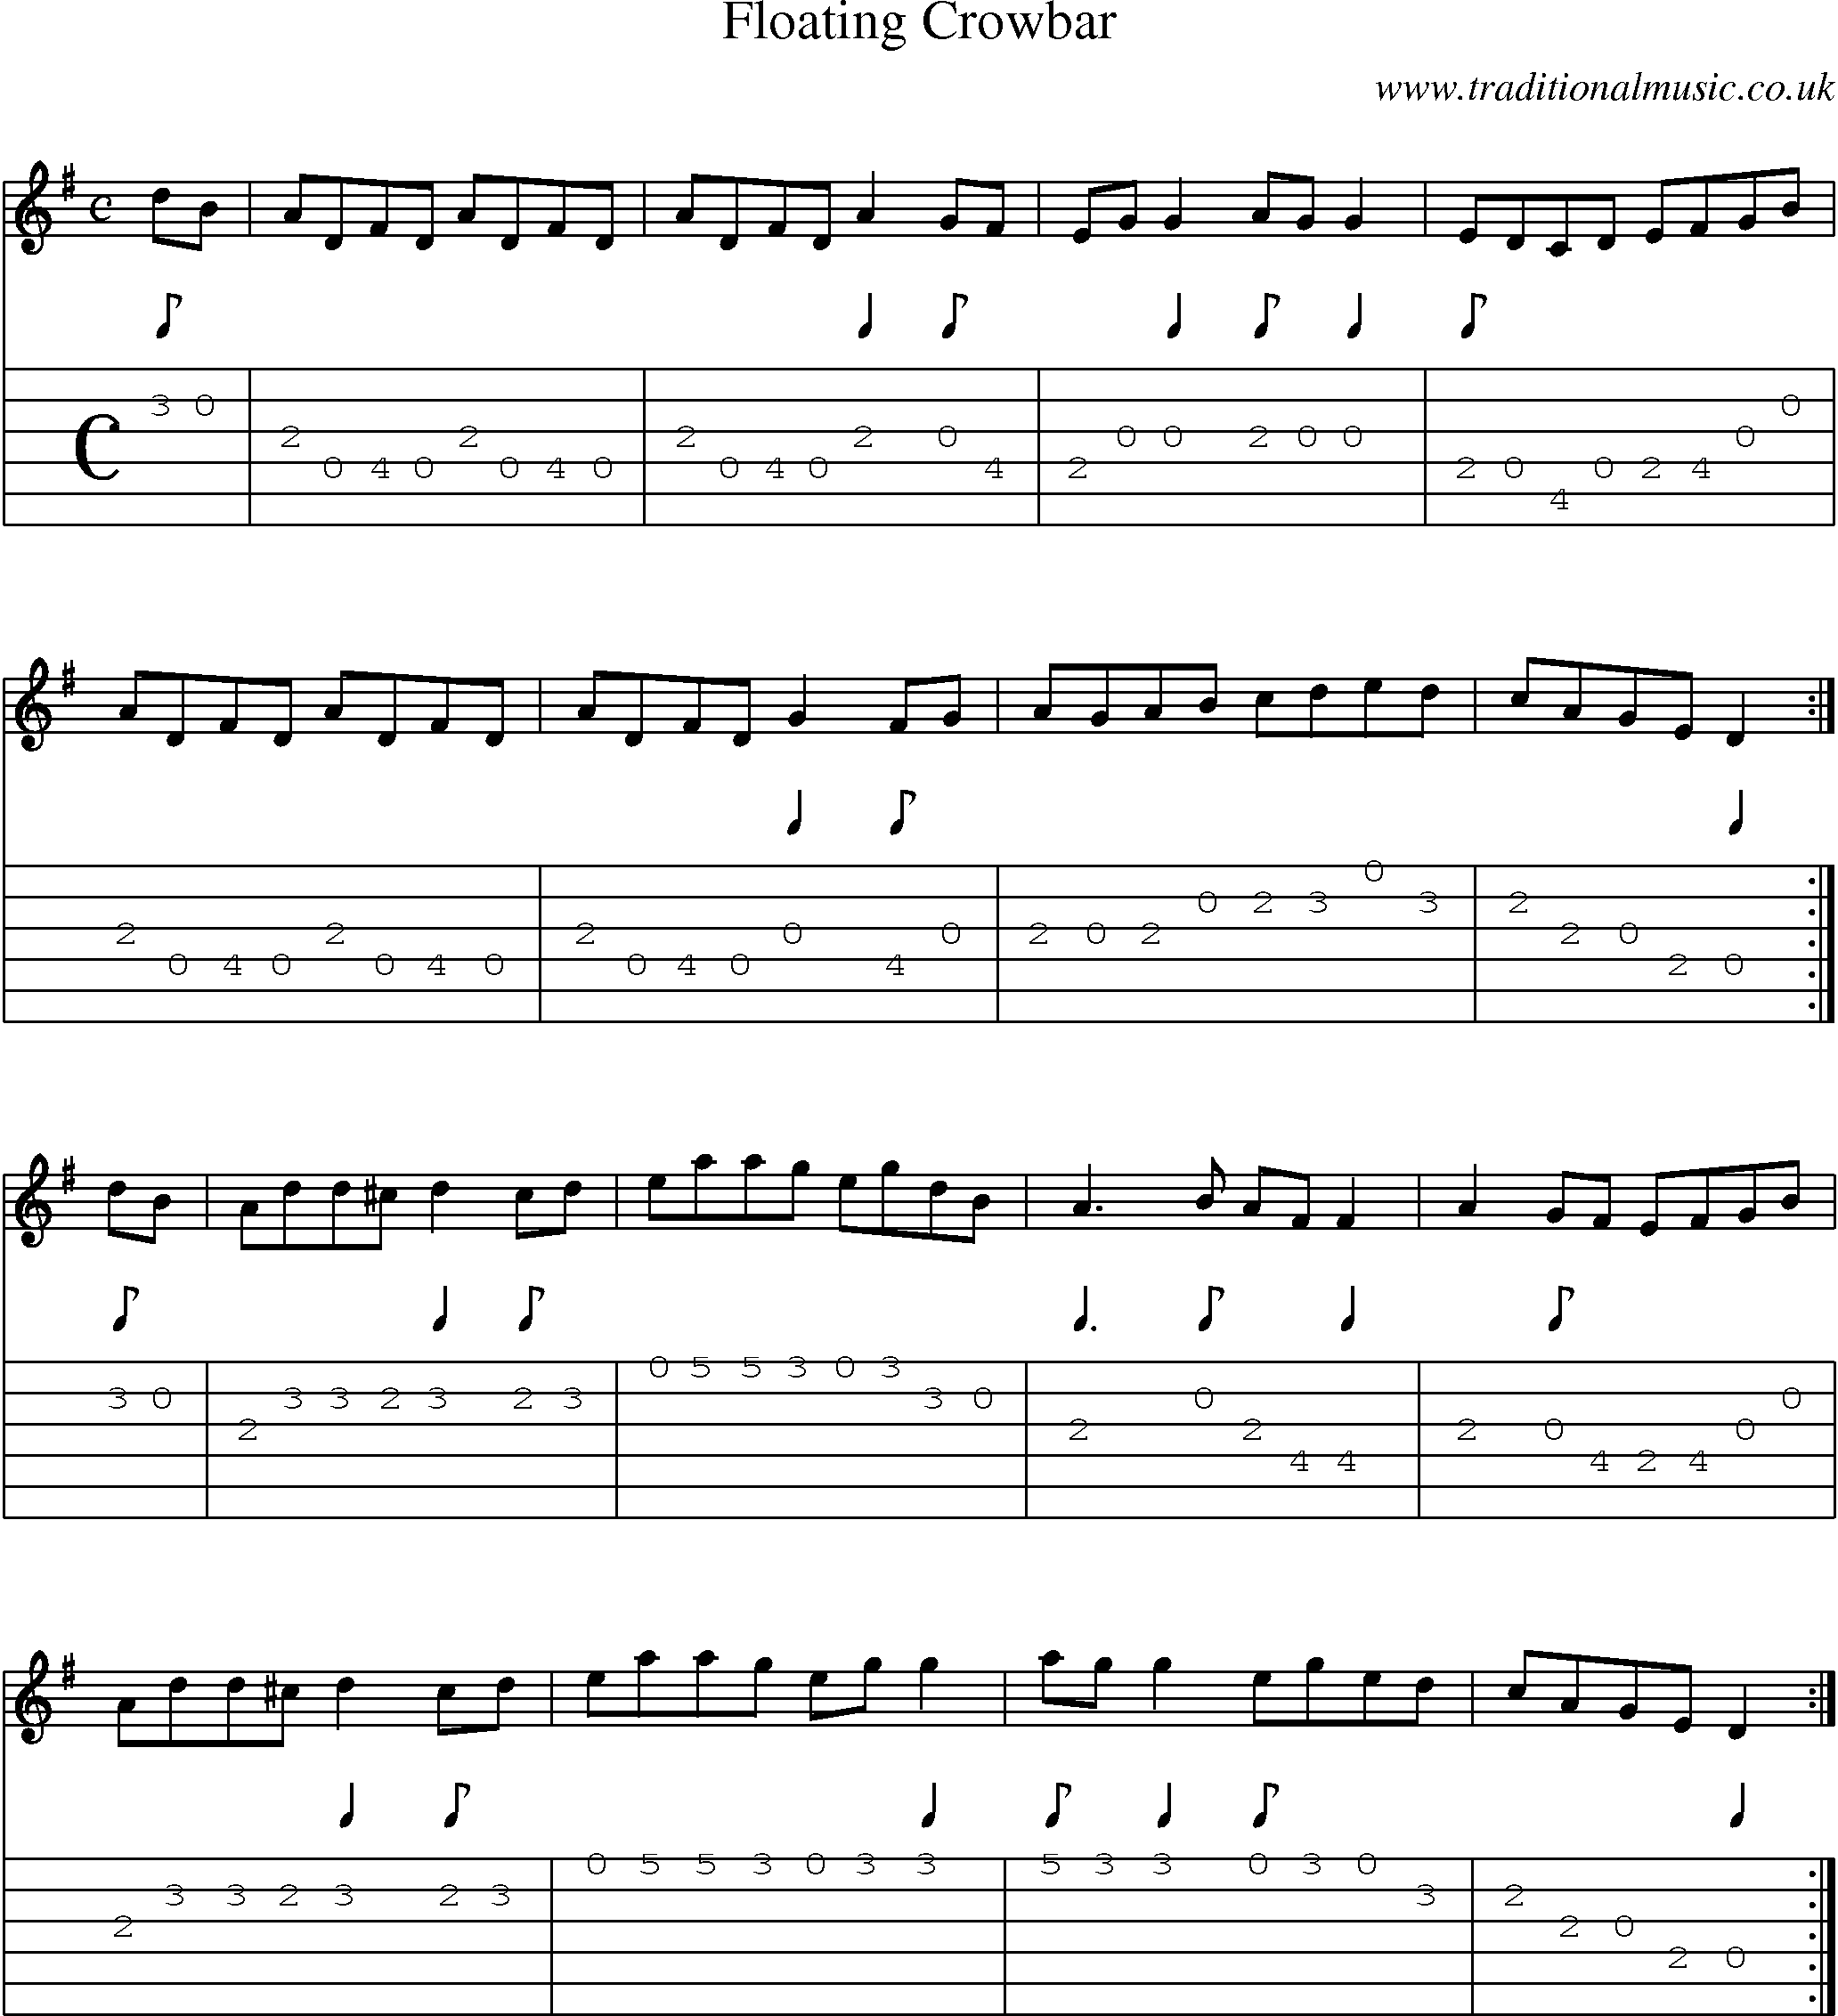 Music Score and Guitar Tabs for Floating Crowbar